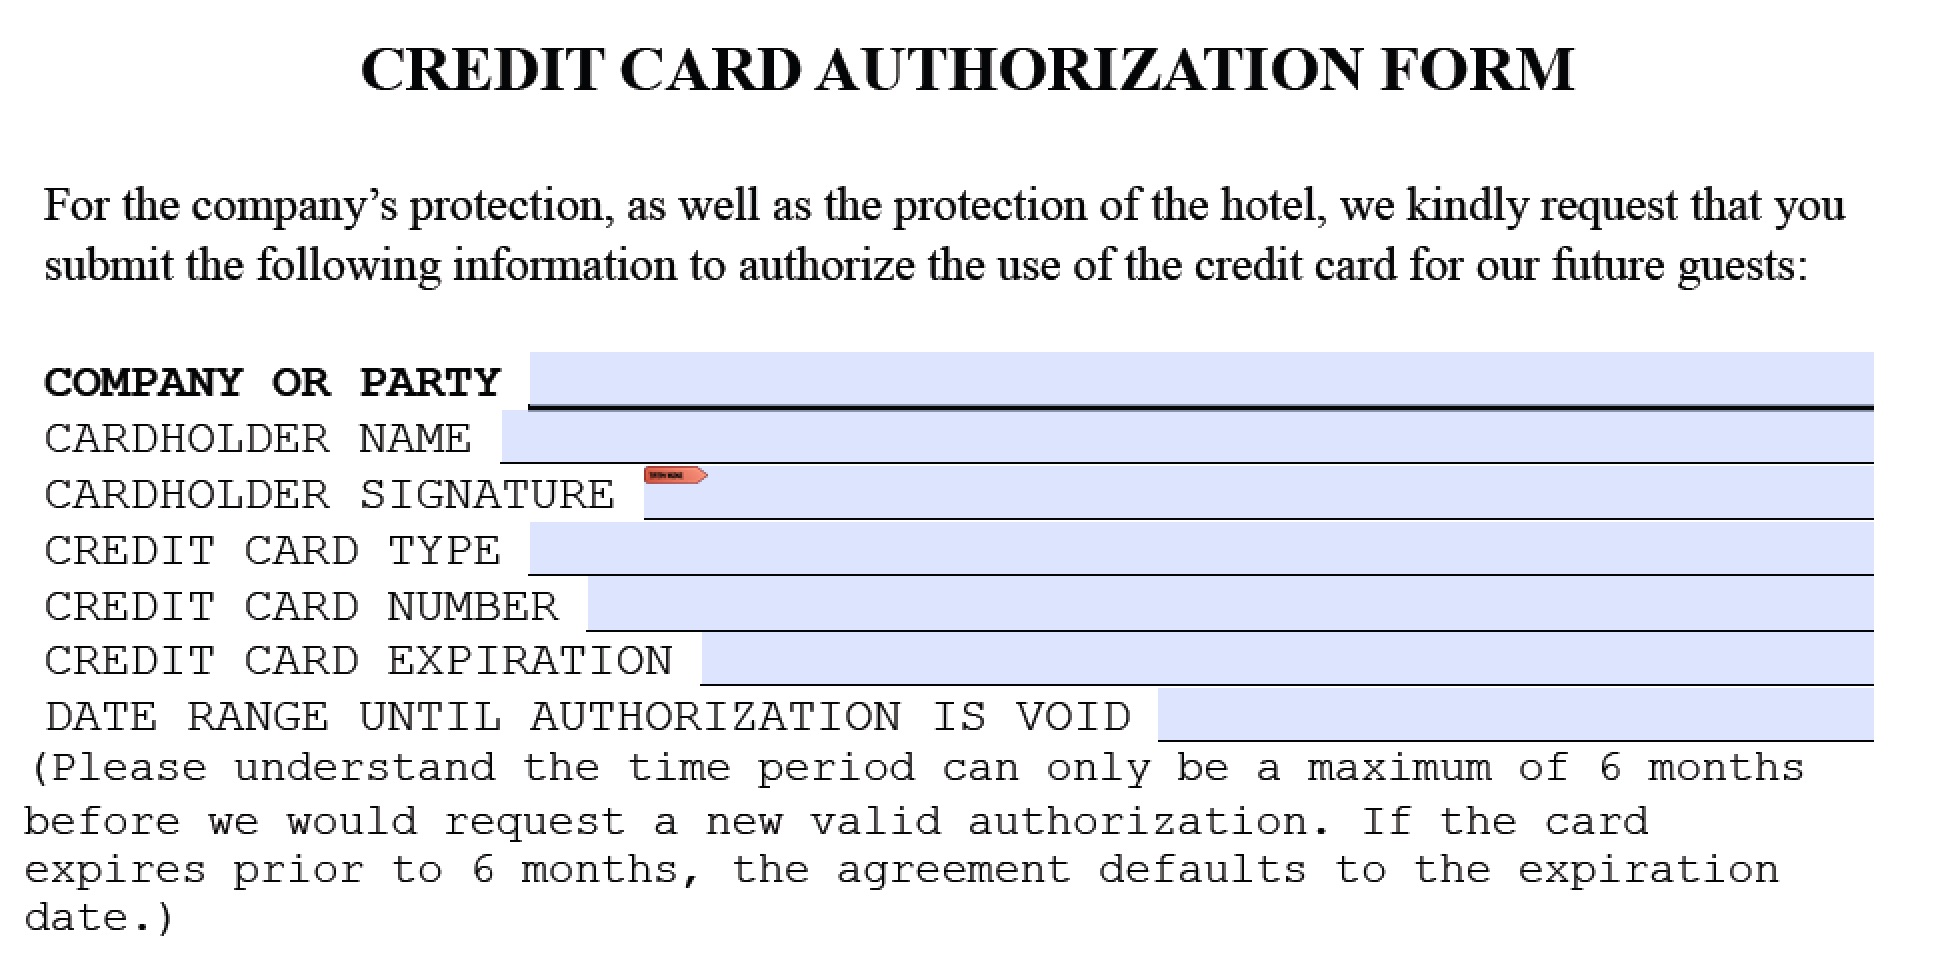 download-holiday-inn-credit-card-authorization-form-template-pdf